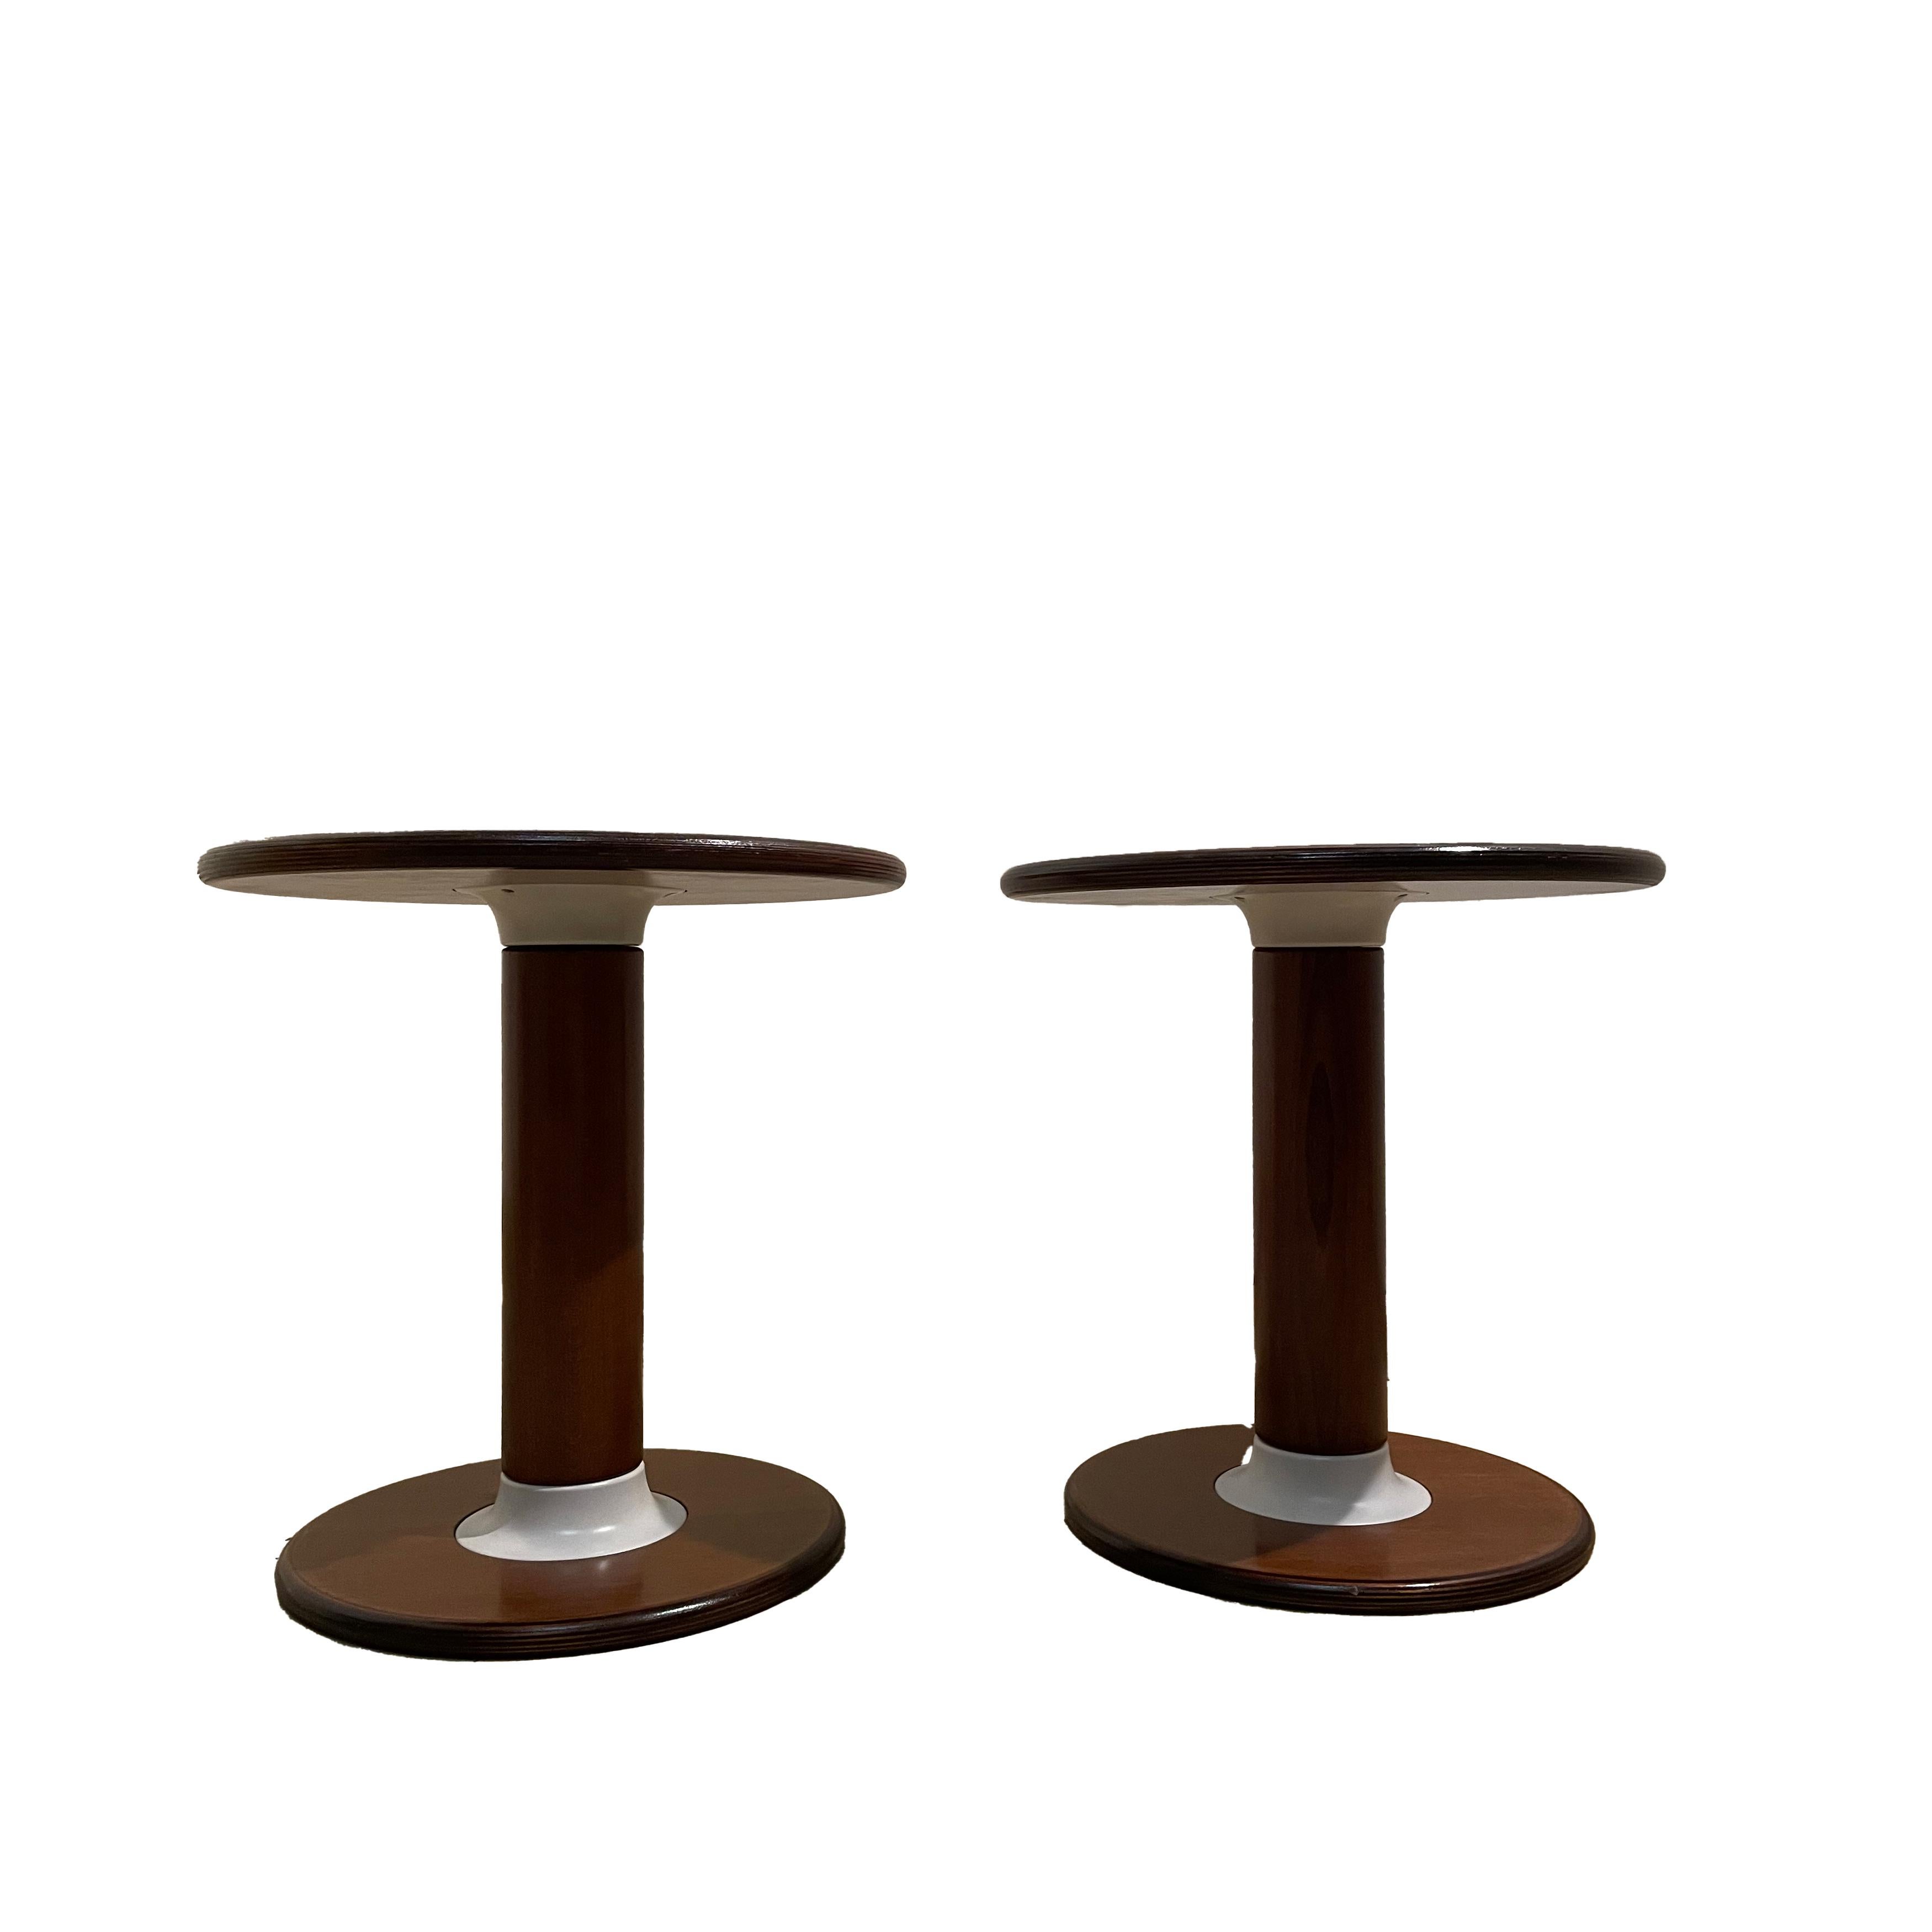 Pair of Rocchetto side tables, designed by Ettore Sottsass and manufactured by Poltronova in 1964.
Made of lacquered walnut wood.
Excellent vintage condition.

Ettore Sottsass Jr., a highly talented architect and designer, was born into a family of